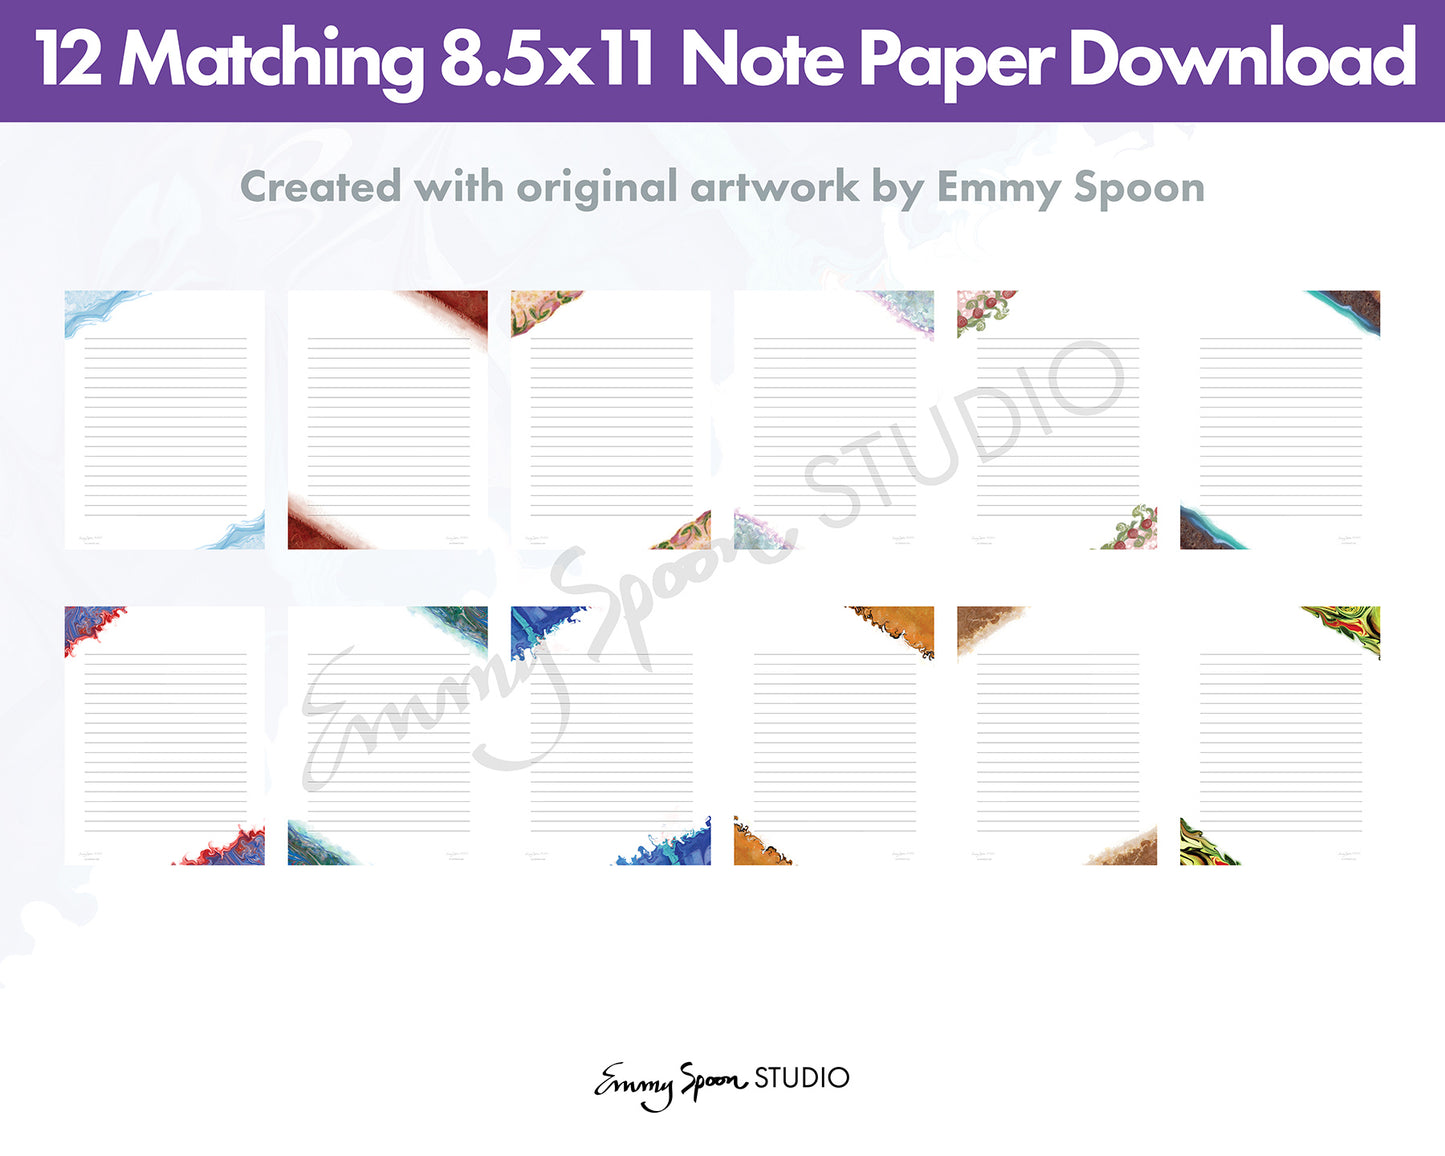 12 Matching 8.5 x11 Note Paper Download Created with original artwork by Emmy Spoon